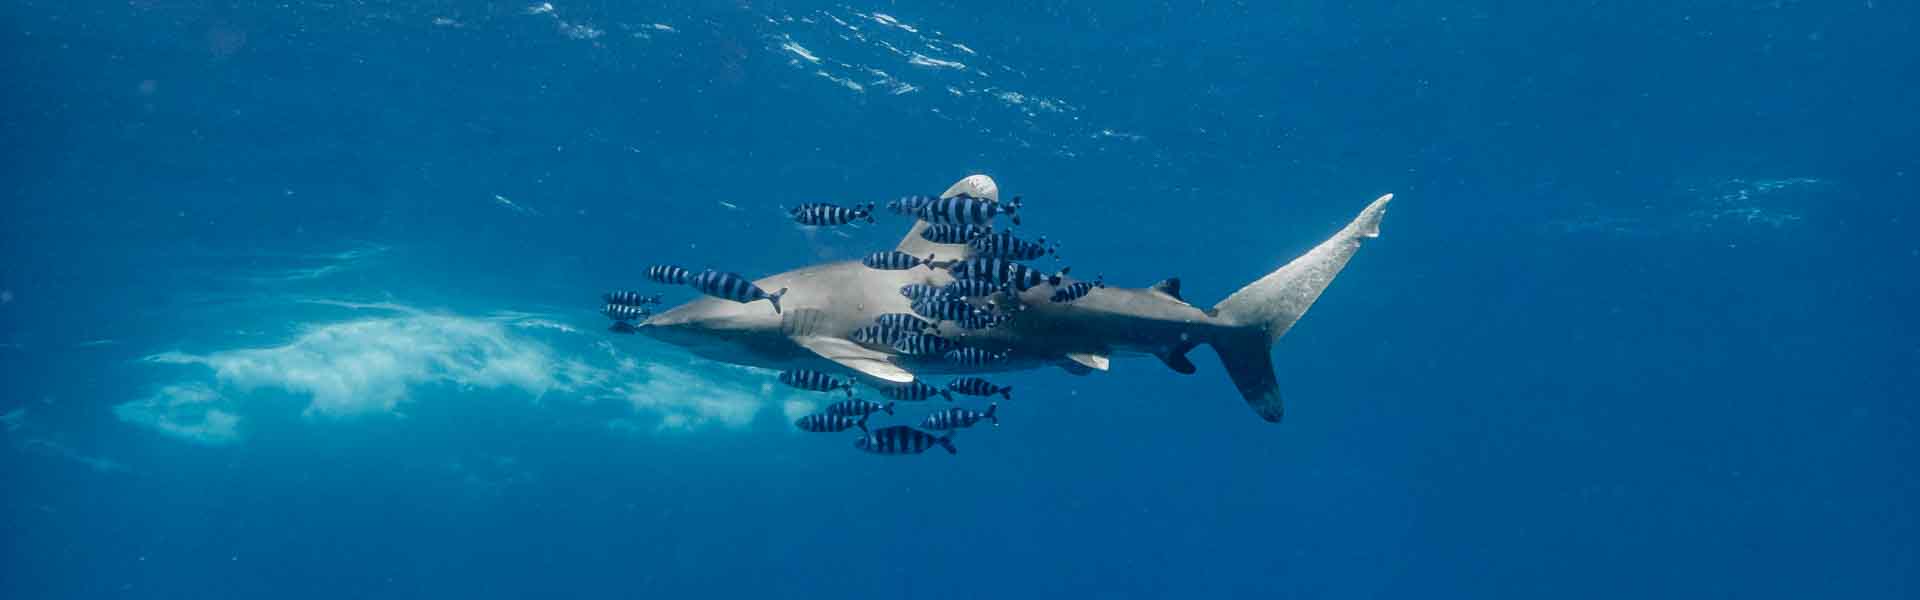 Do’s and Don’ts when diving with sharks 